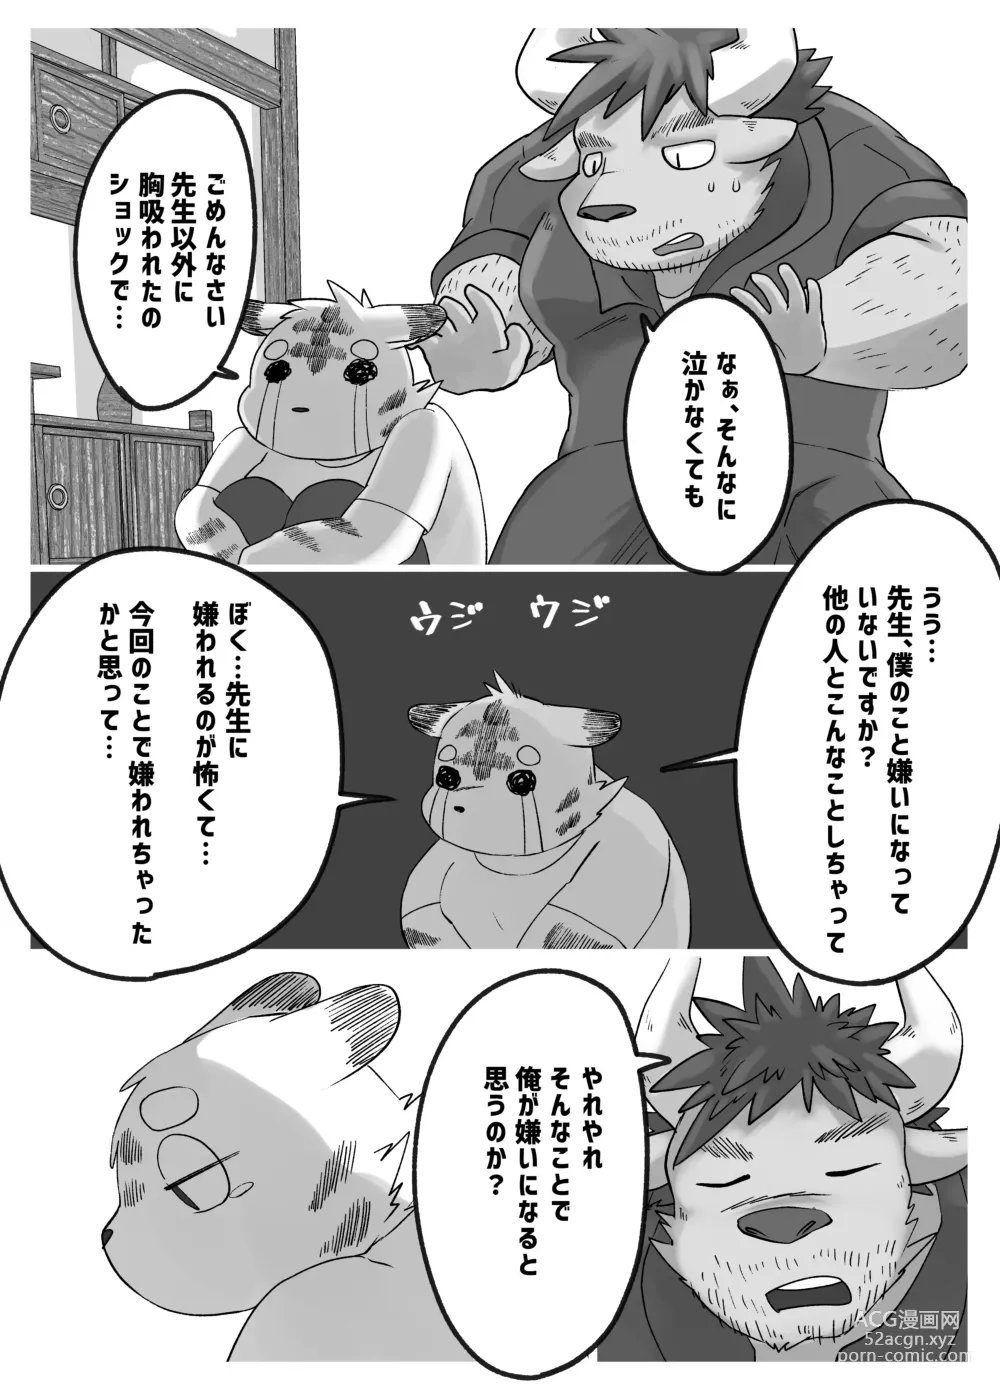 Page 15 of doujinshi Muscular Bull Teacher & Chubby Tiger Student 3